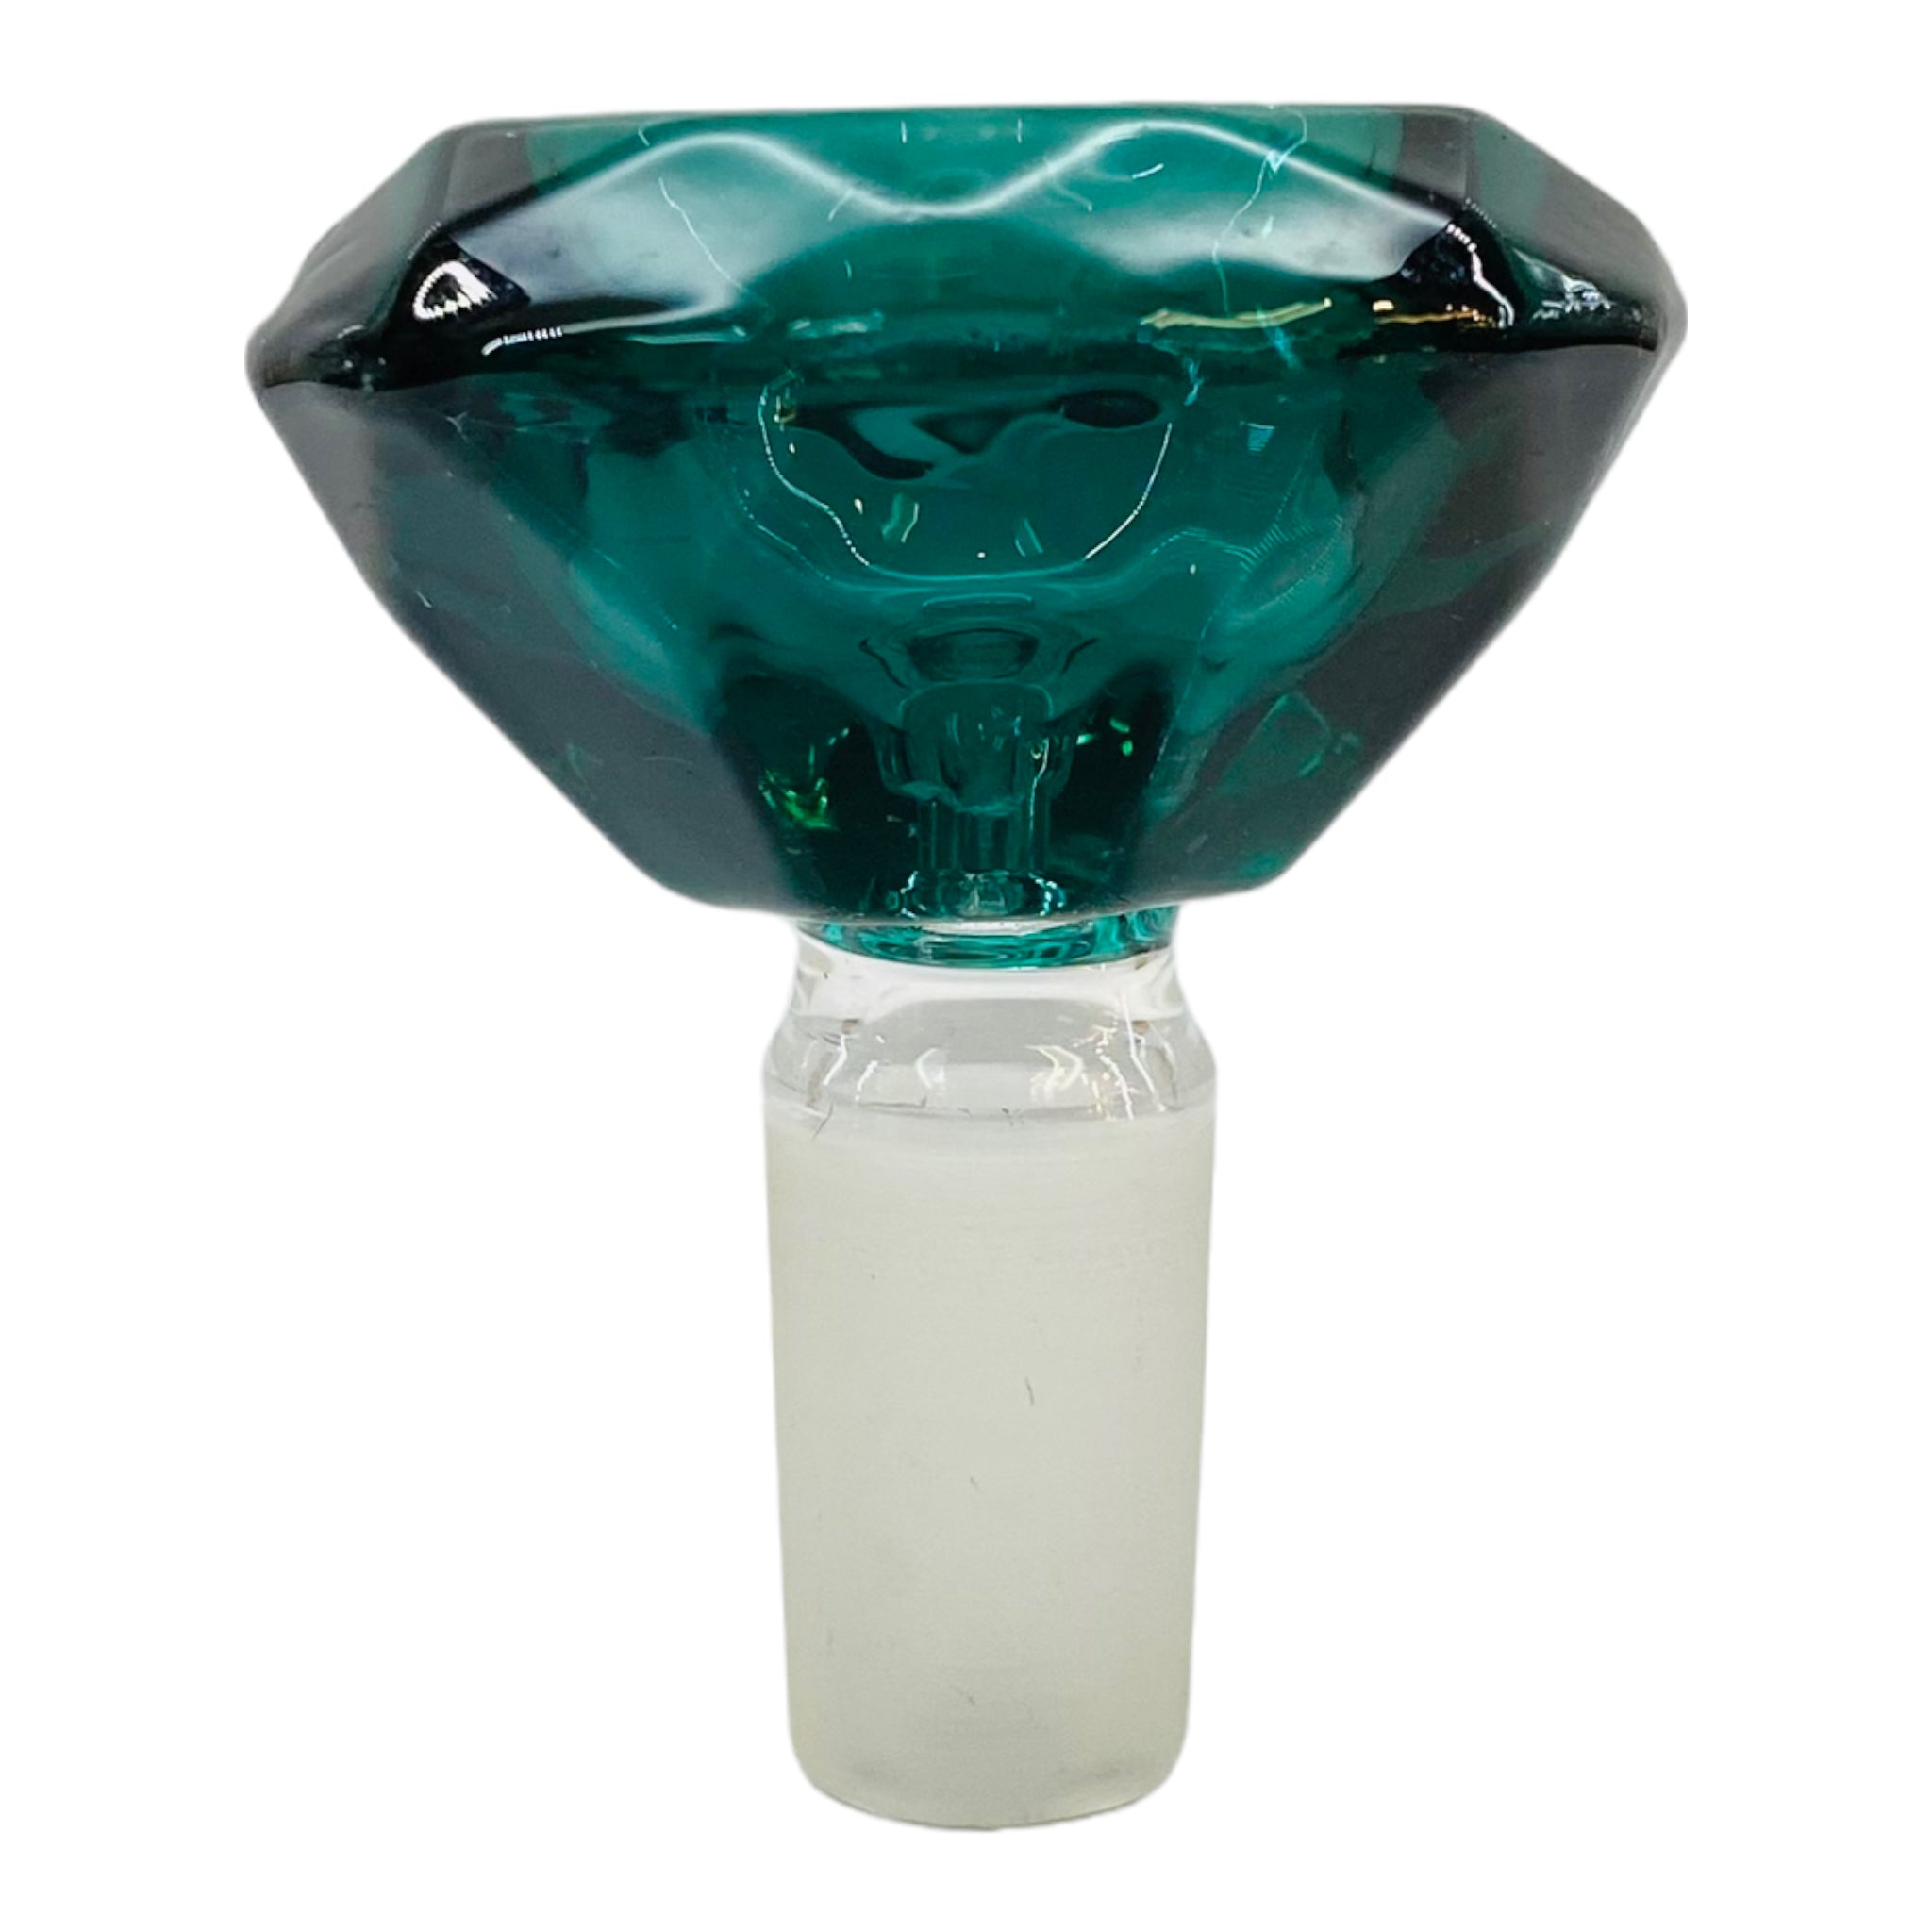 14mm Flower Bowl - Faceted Diamond Glass Bong Bowl Piece - Turquoise